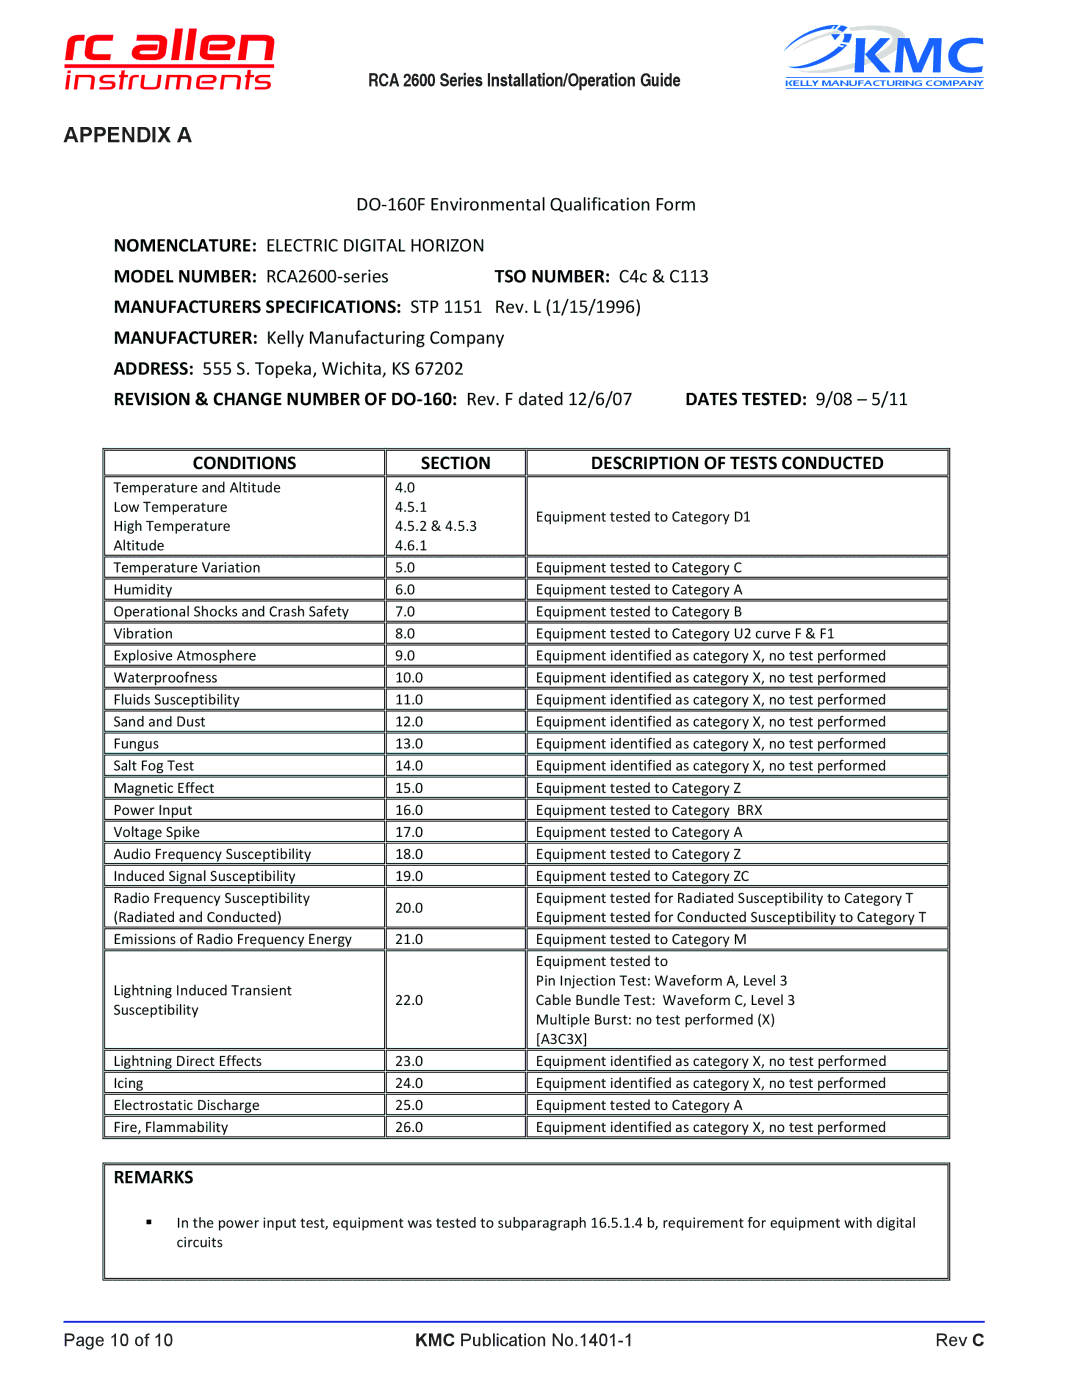 KMC RCA 2600-3 manual Appendix a, Manufacturers Specifications STP 